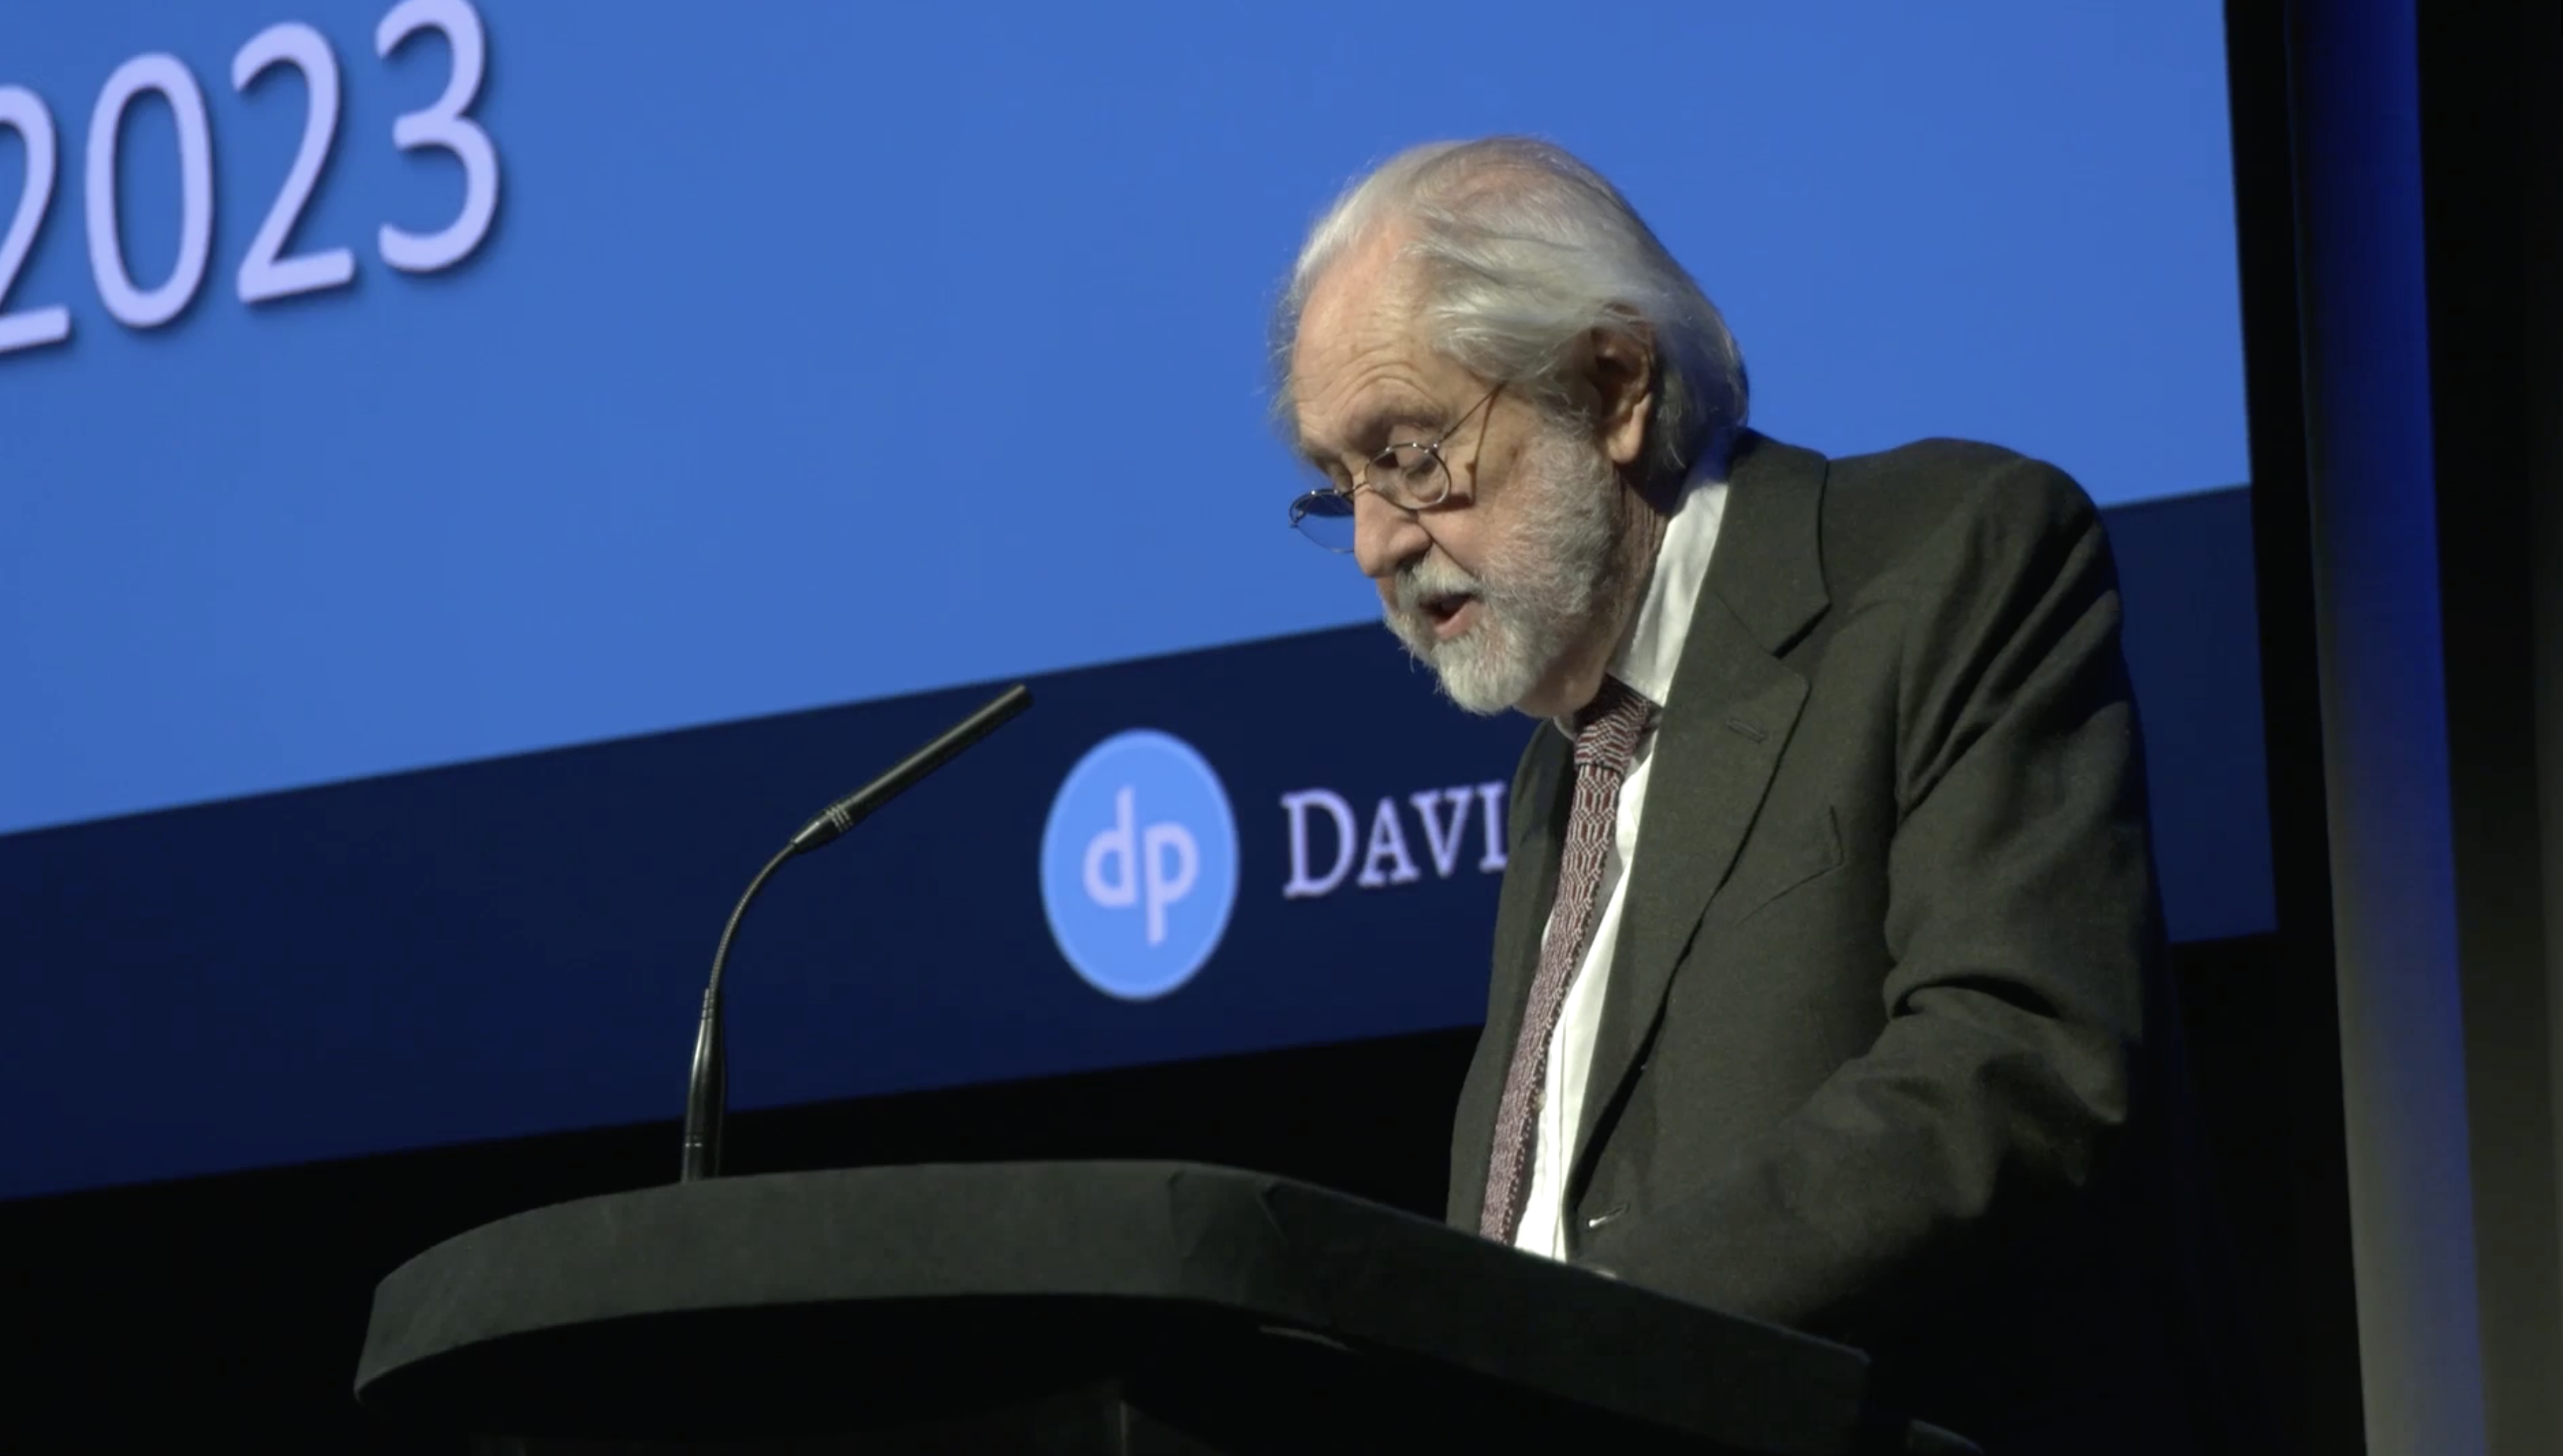 Lord Puttnam calls on UK film industry to urgently invest in skills training